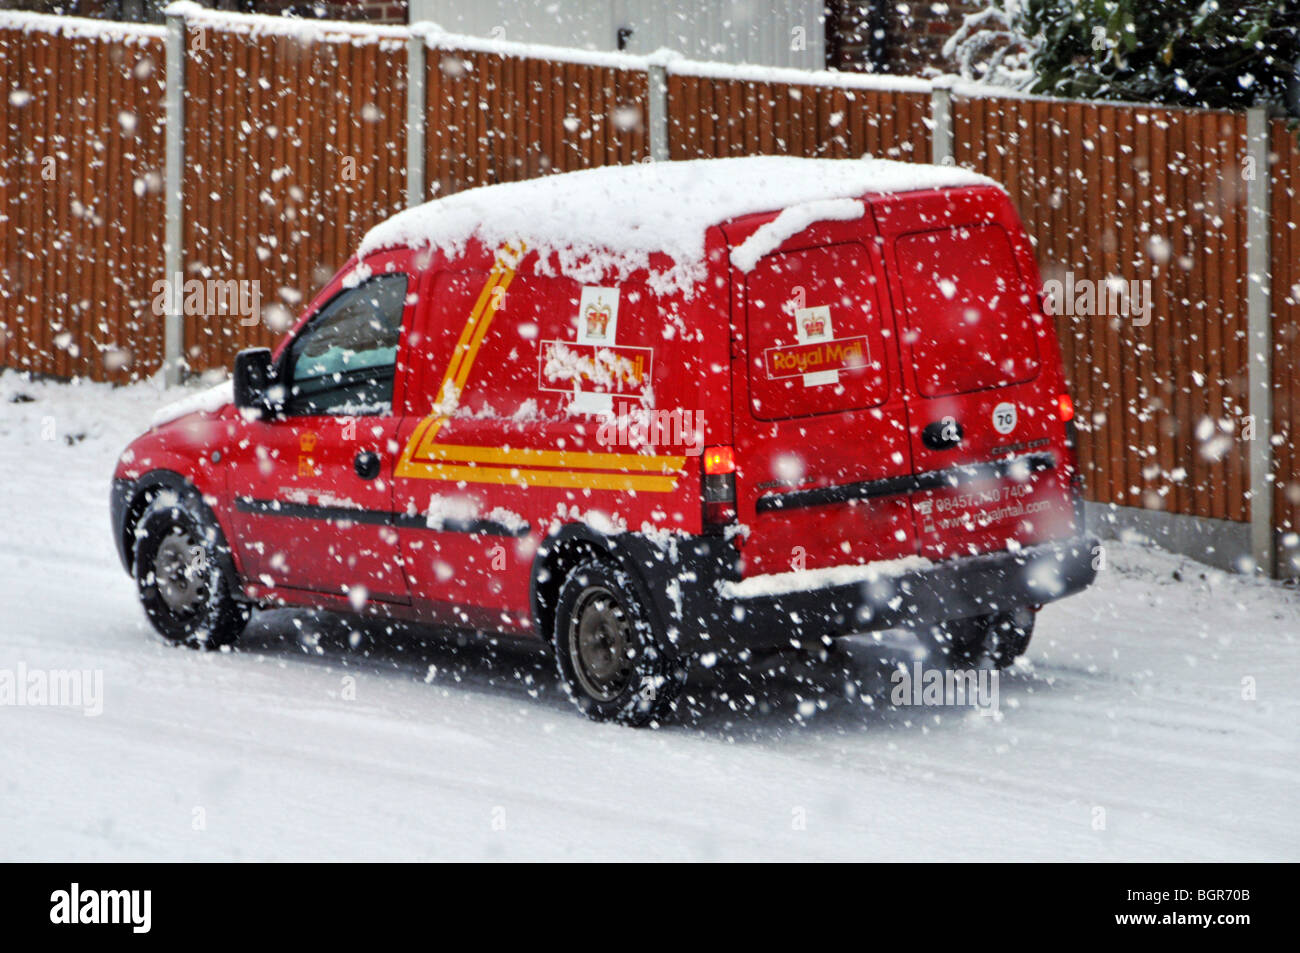 Cold winter weather snowing on parked Royal Mail delivery post van in residential street scene during snow storm Brentwood Essex England UK Stock Photo